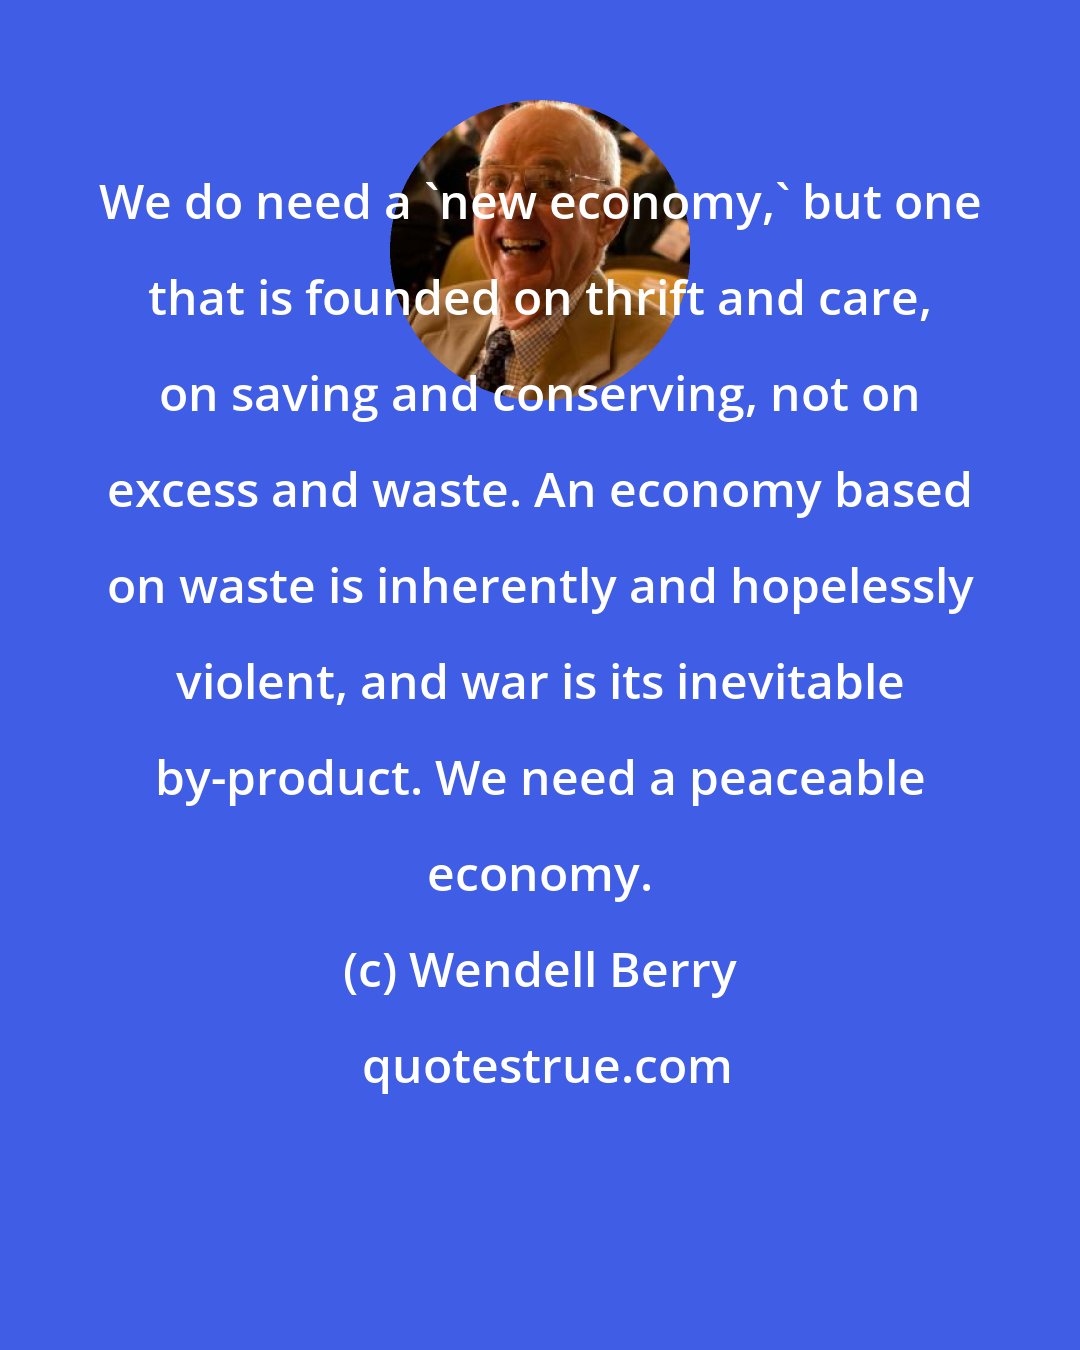 Wendell Berry: We do need a 'new economy,' but one that is founded on thrift and care, on saving and conserving, not on excess and waste. An economy based on waste is inherently and hopelessly violent, and war is its inevitable by-product. We need a peaceable economy.